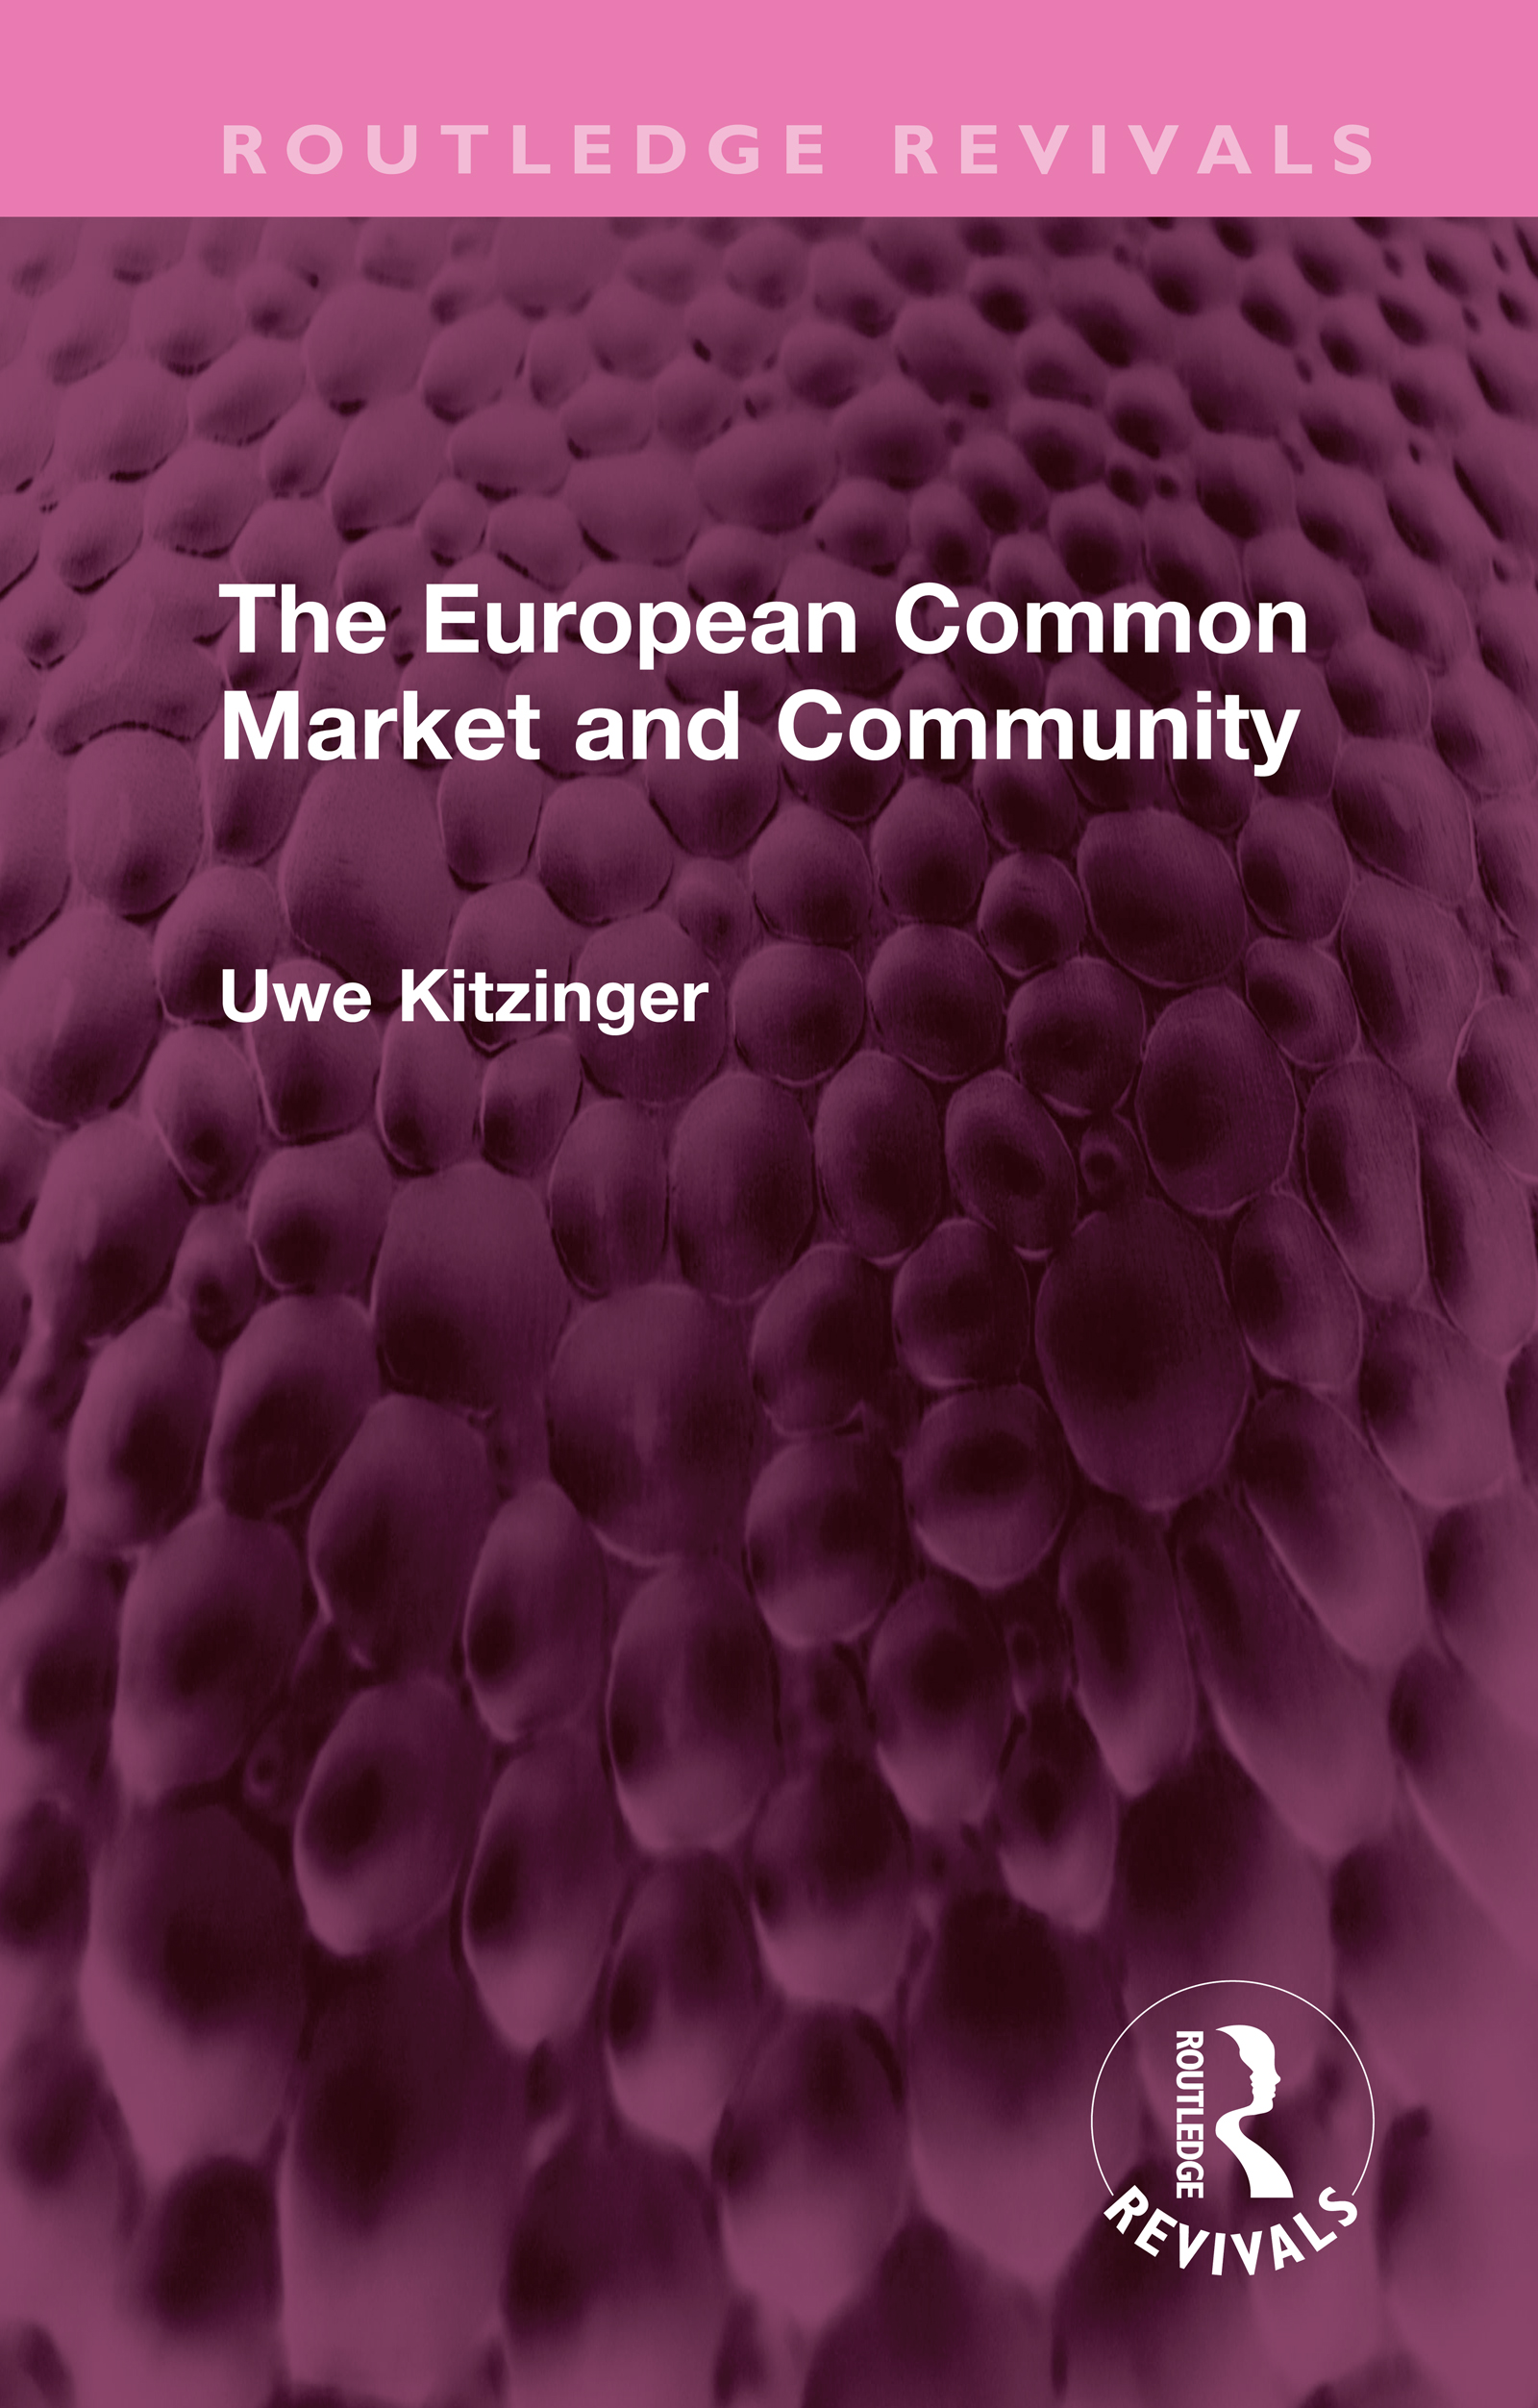 The European Common Market and Community